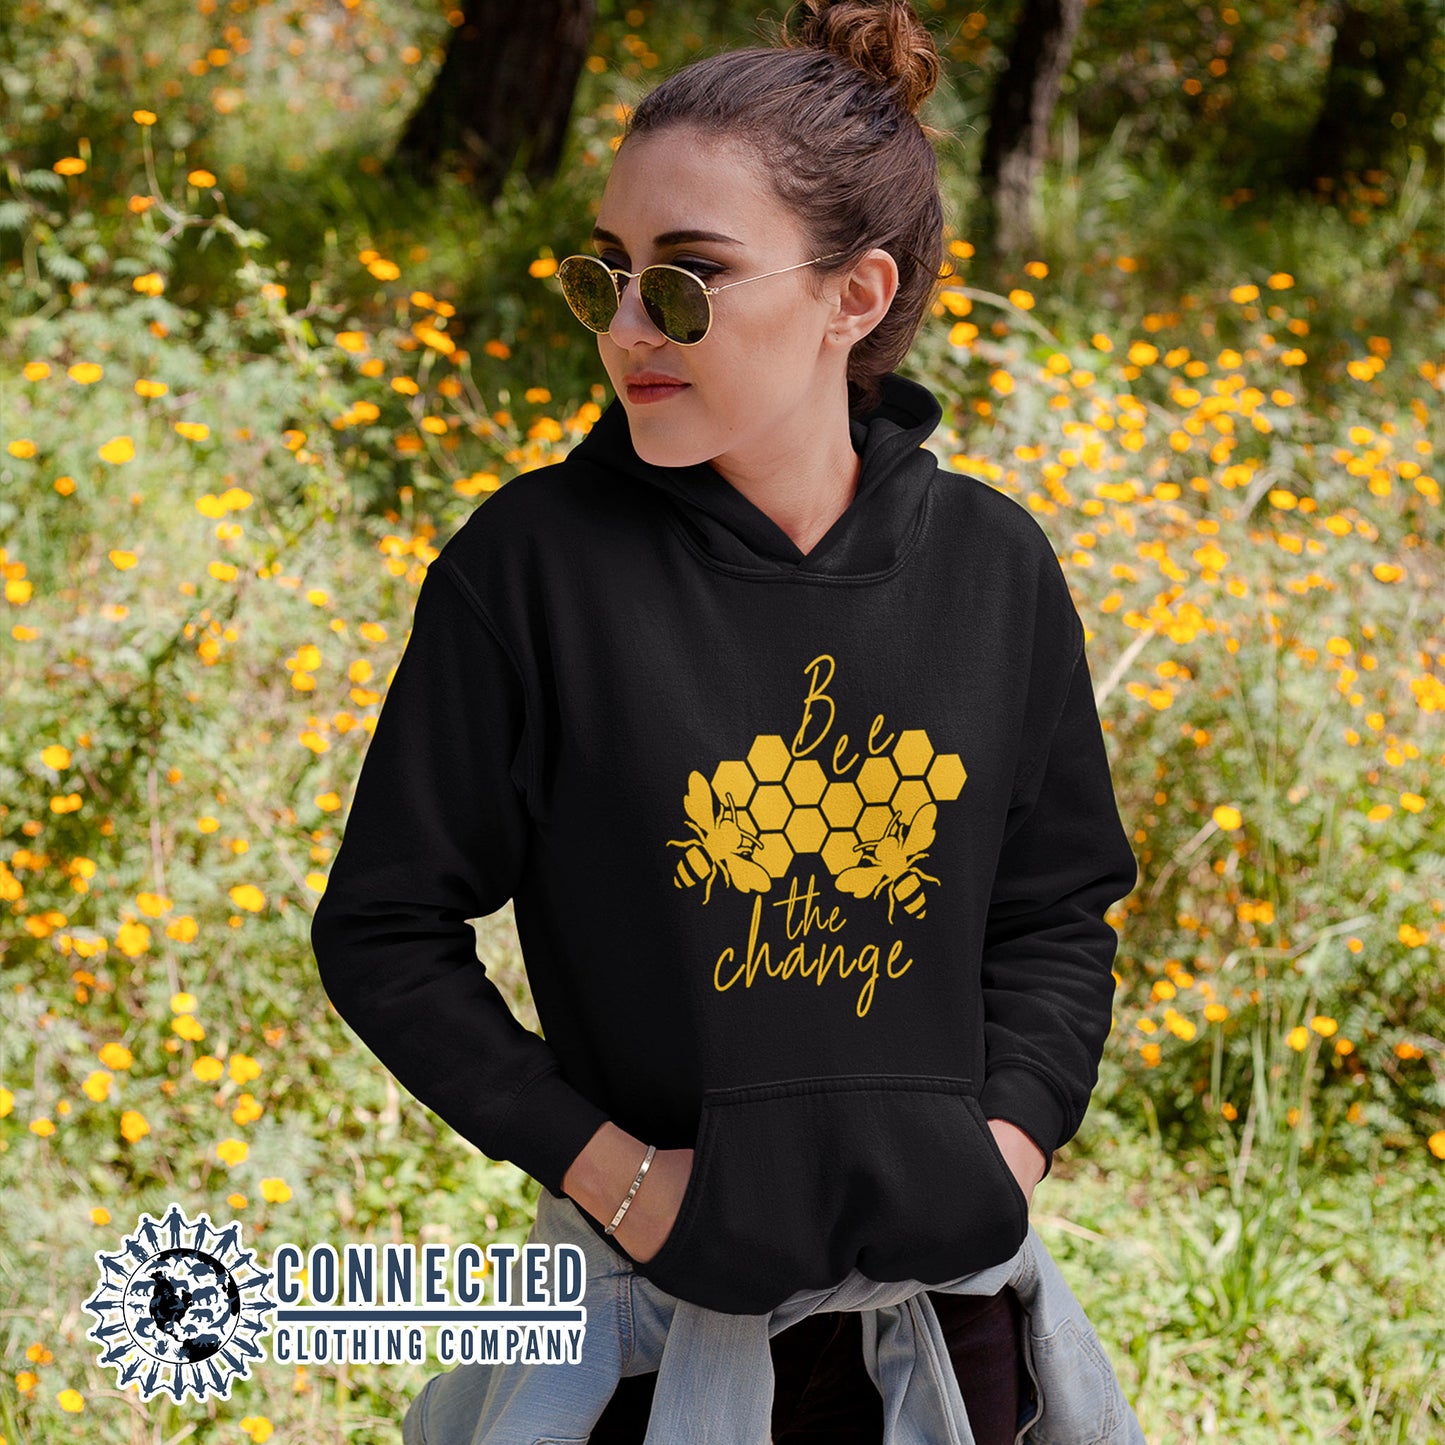 Model Wearing Black Bee The Change Unisex Hoodie - Connected Clothing Company - Ethically and Sustainably Made - 10% donated to The Honeybee Conservancy